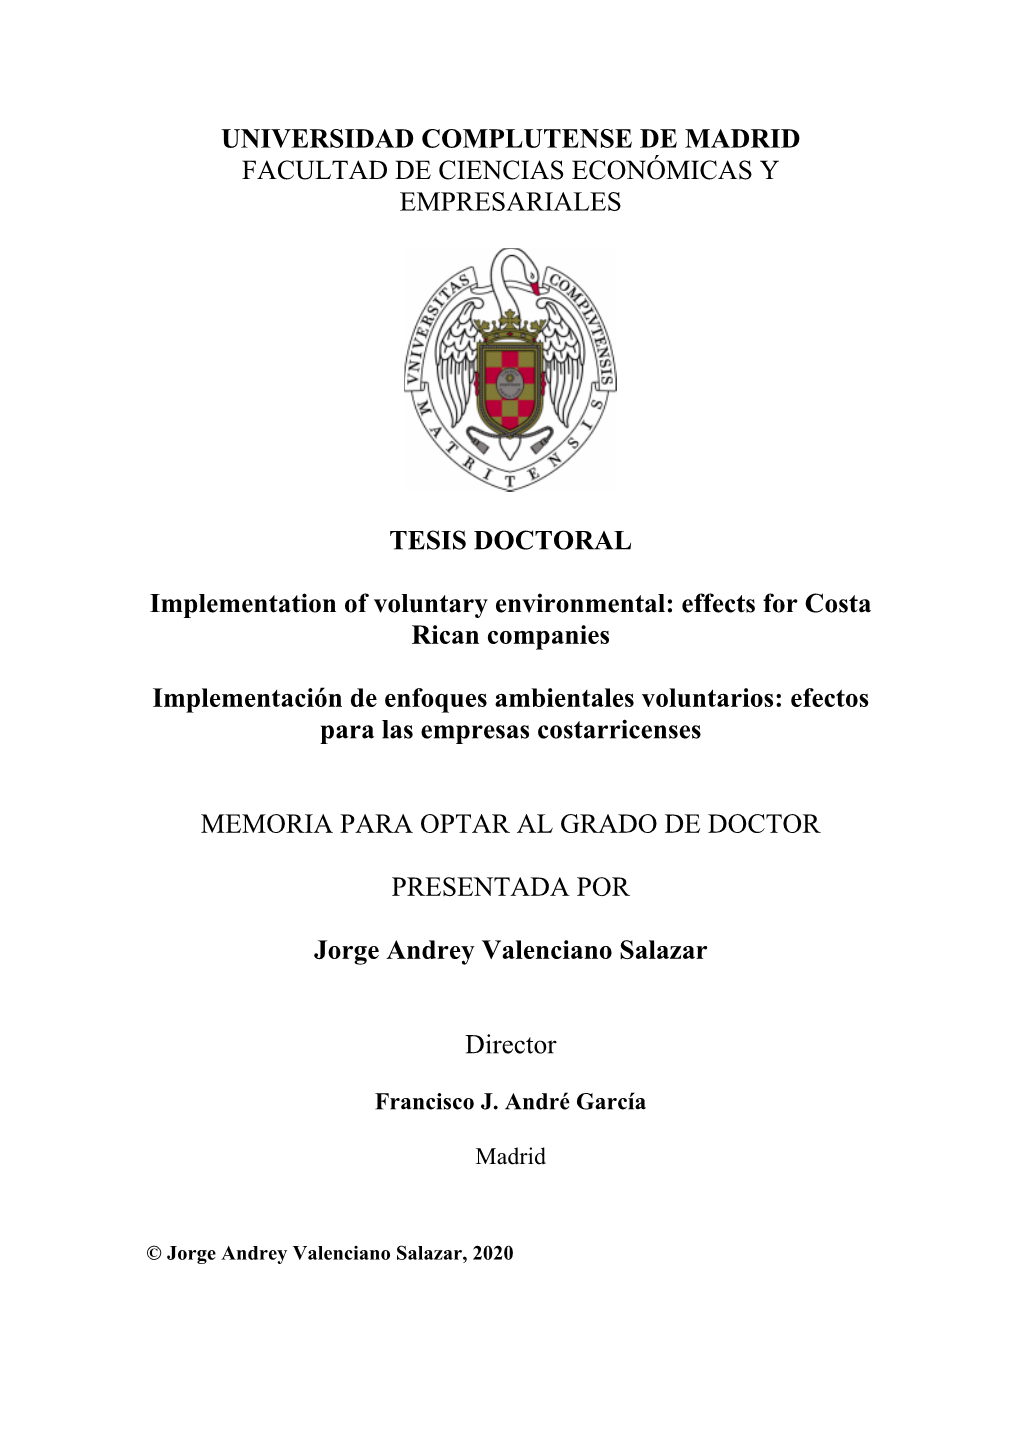 Implementation of Voluntary Environmental Approaches: Effects for Costa Rican Companies